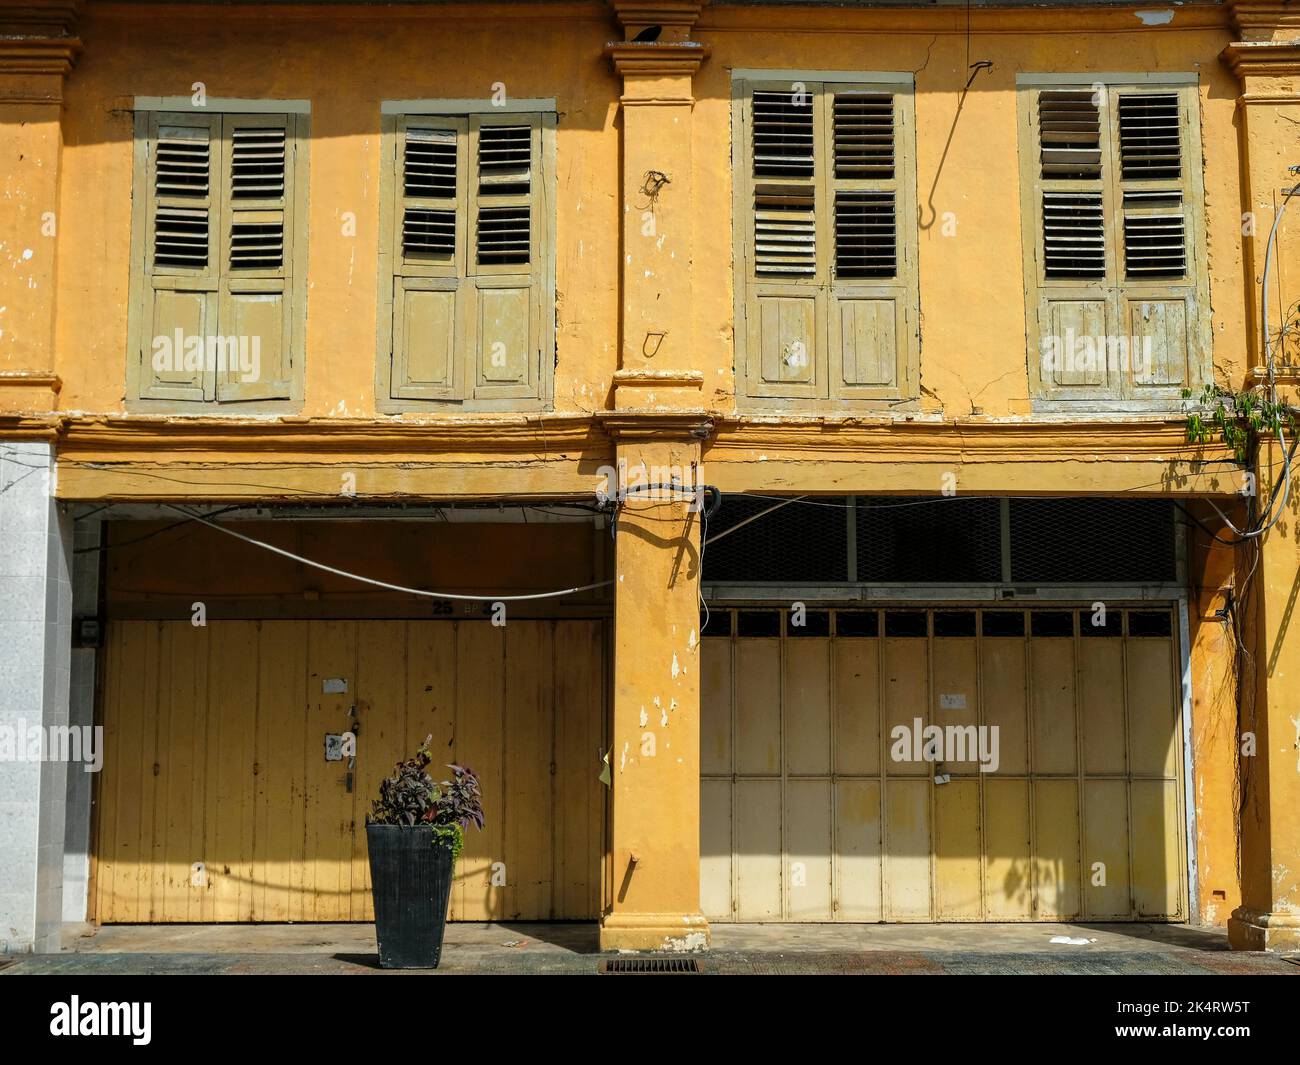 Detail of the facade of a traditional house in Pekan., Malaysia. Stock Photo